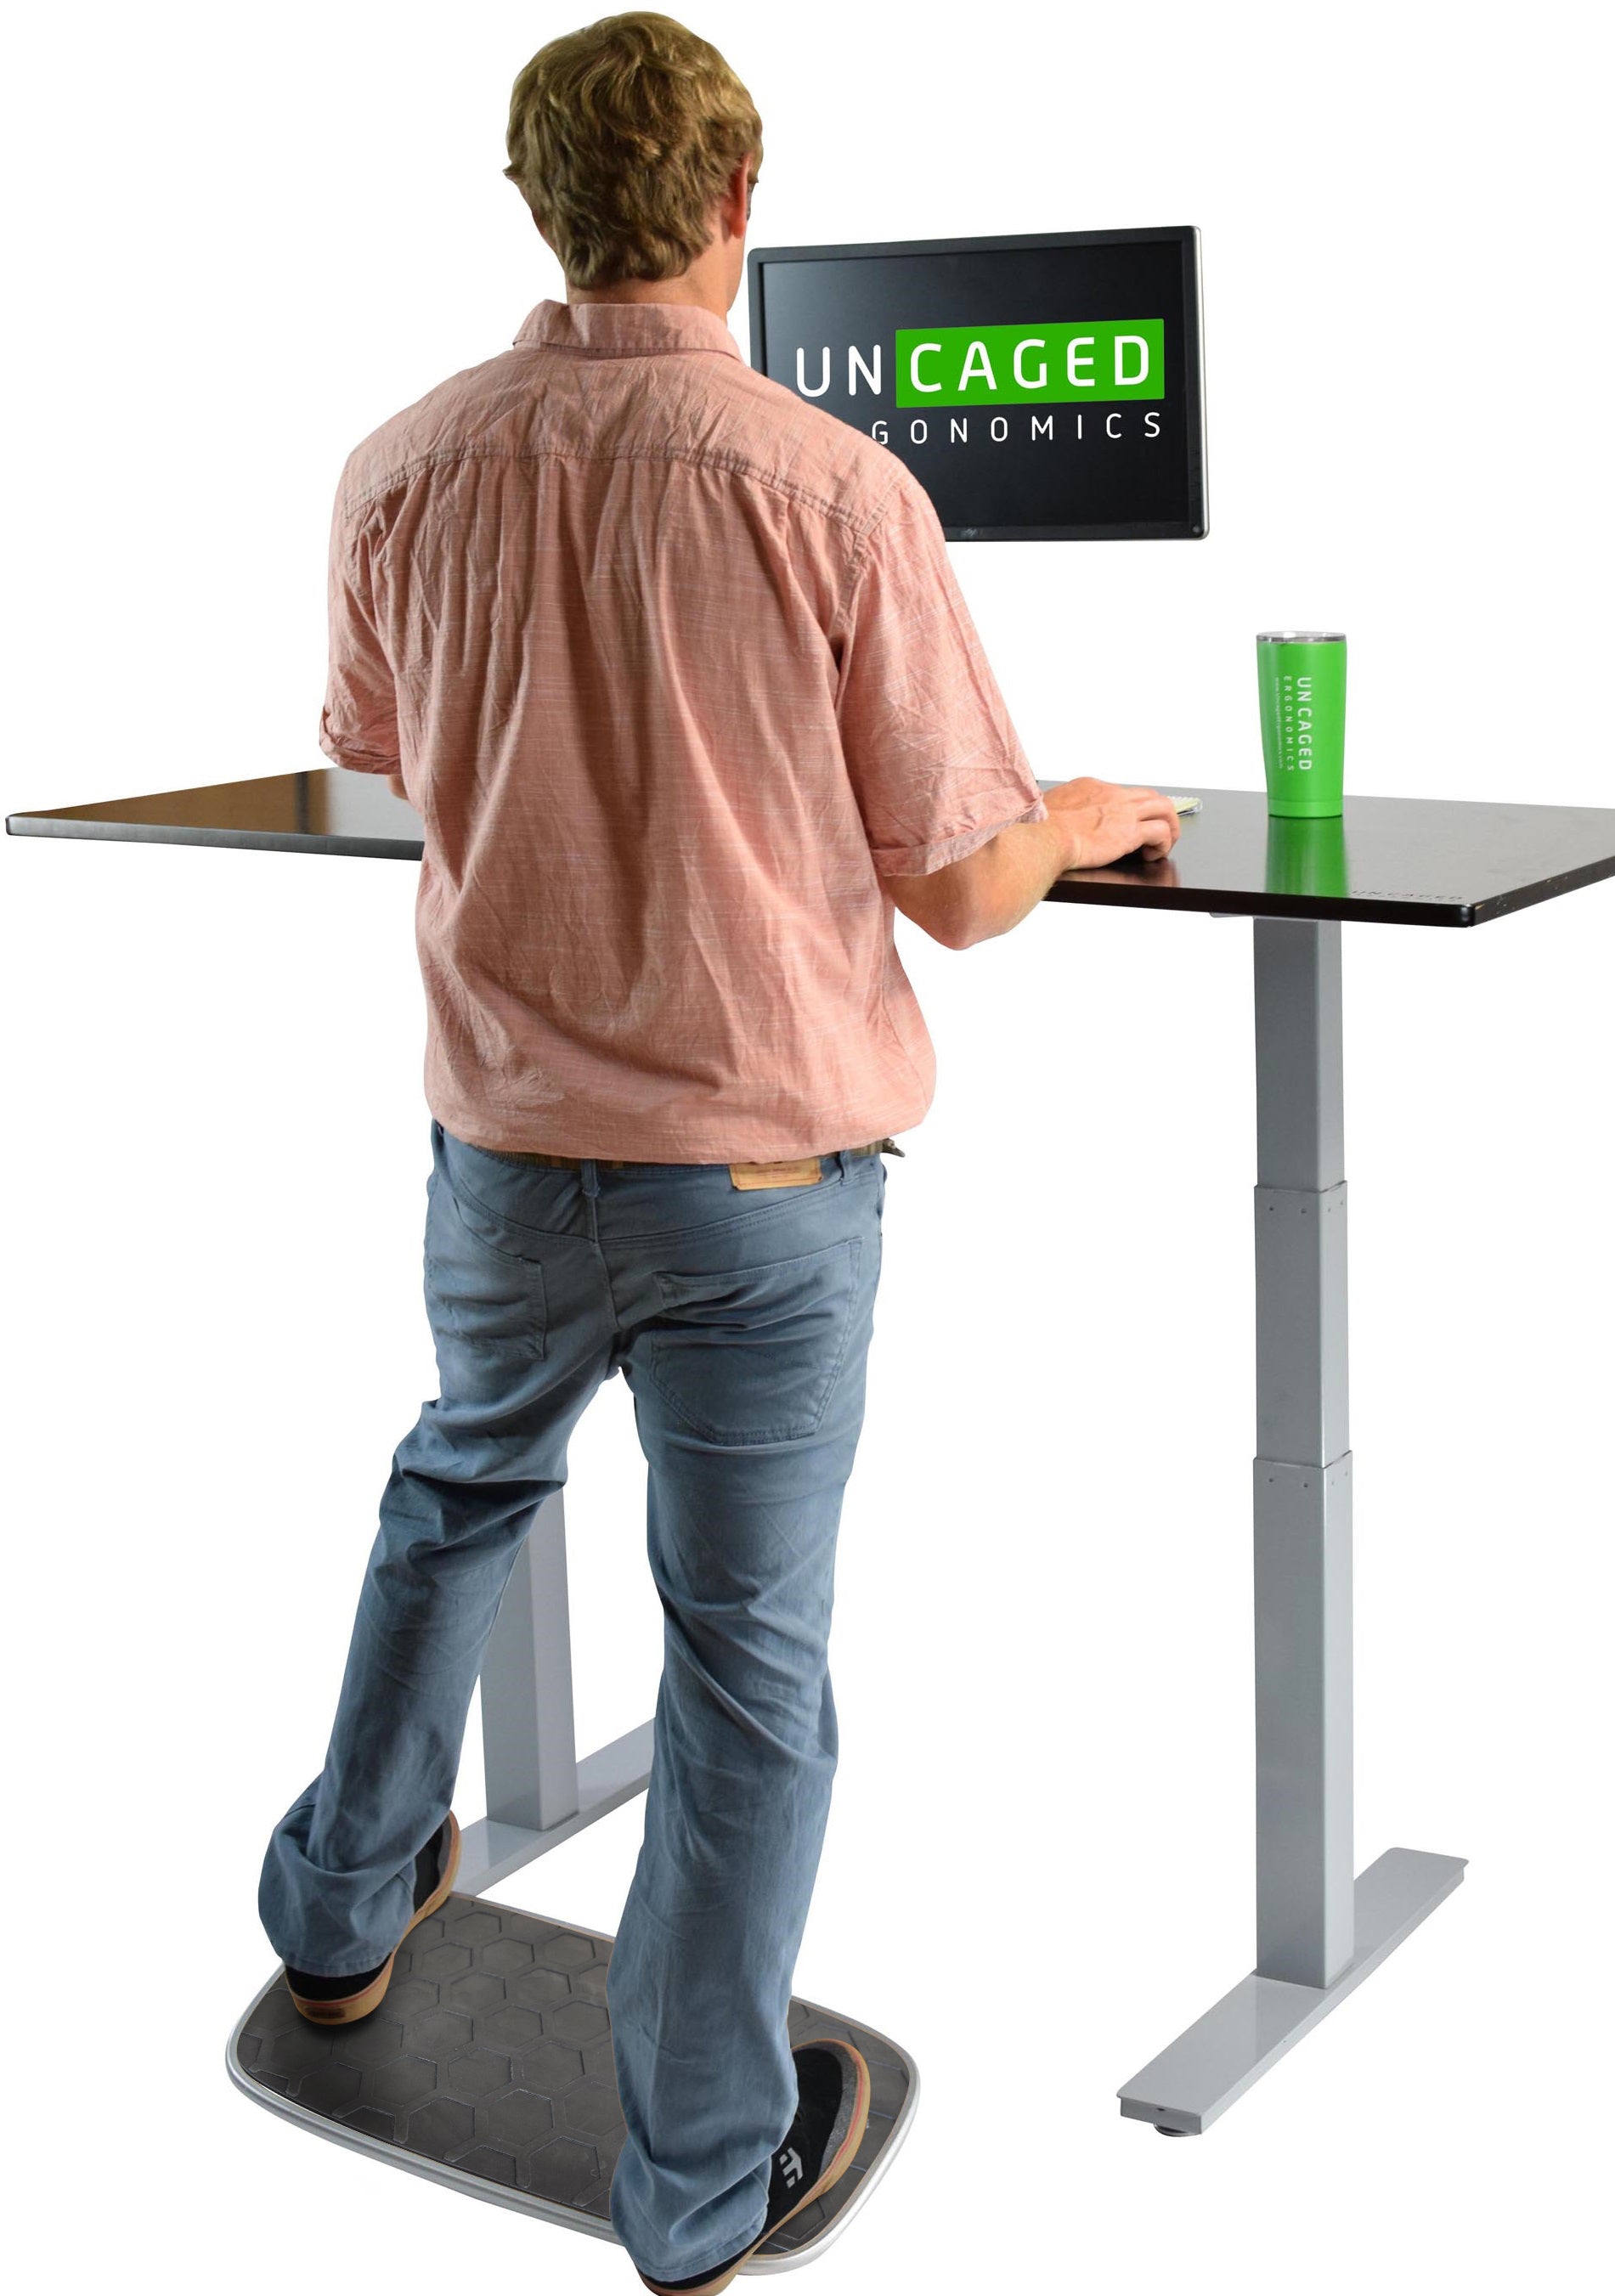  Stand Steady Anti Fatigue Standing Mat with Massage Ball, Ergonomic Standing Mat with Gel Foam Padding for Active Standing